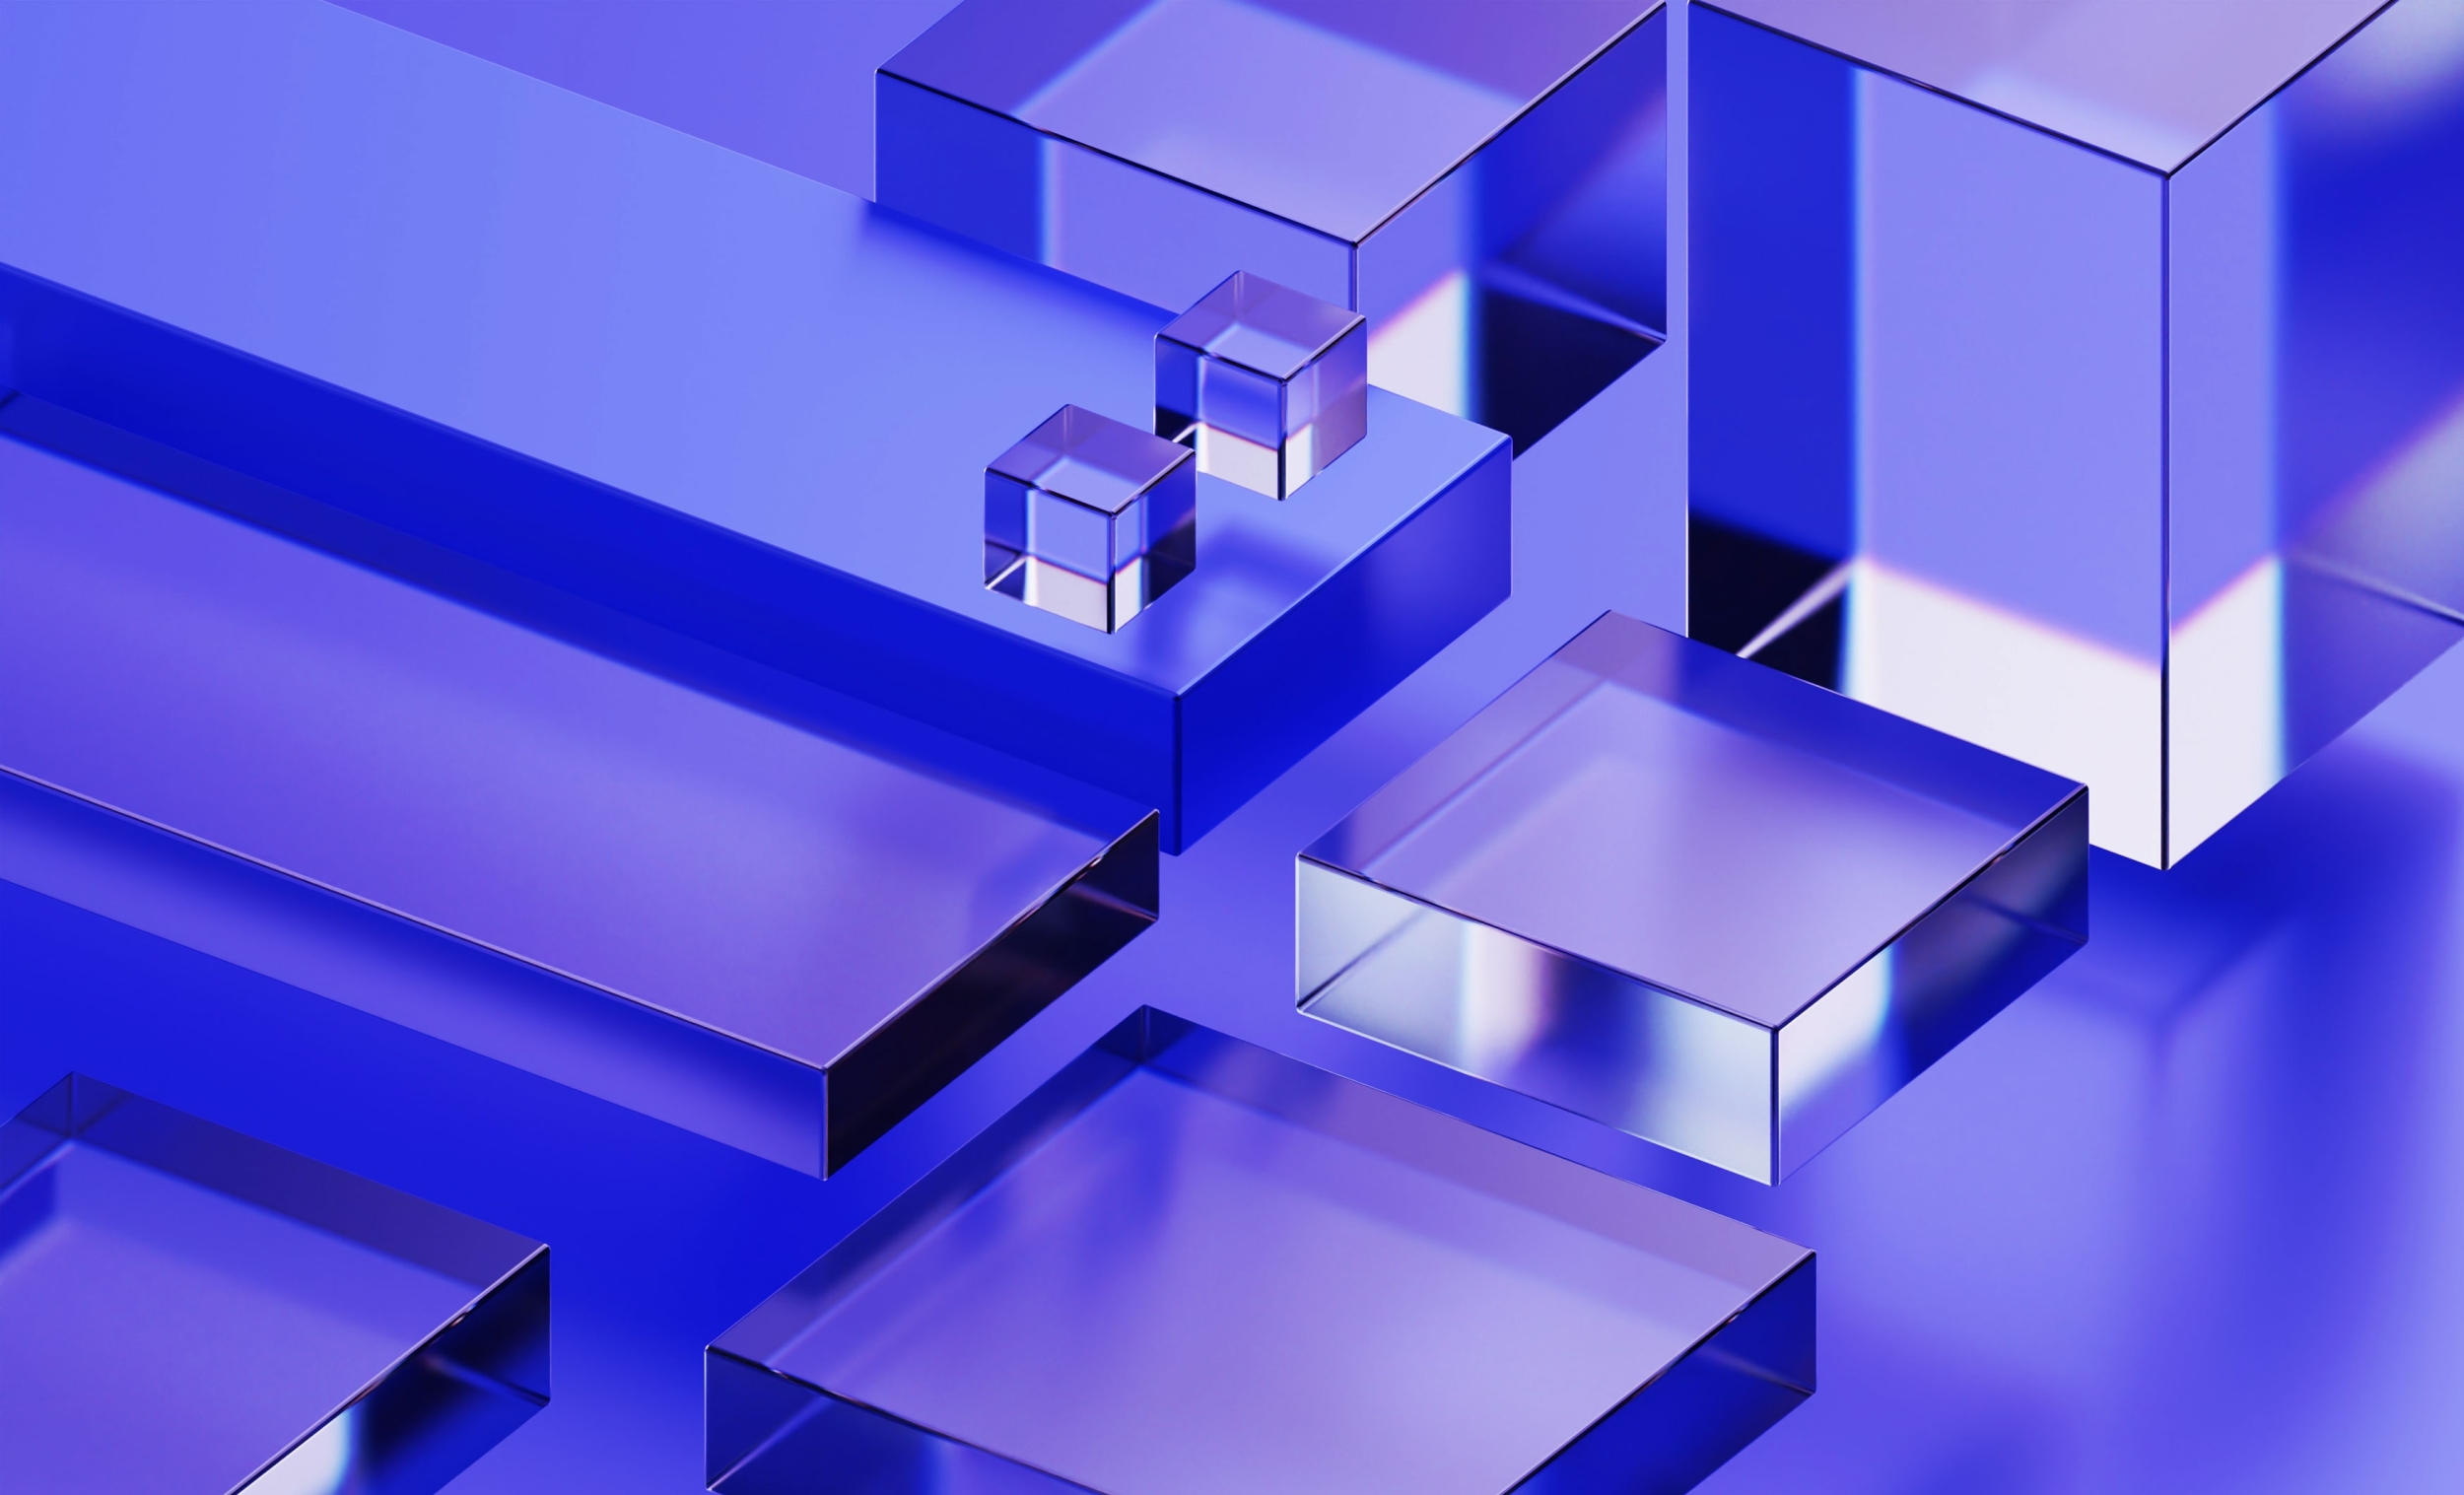 Abstract image of purple transparent blocks, representing analytics and data.